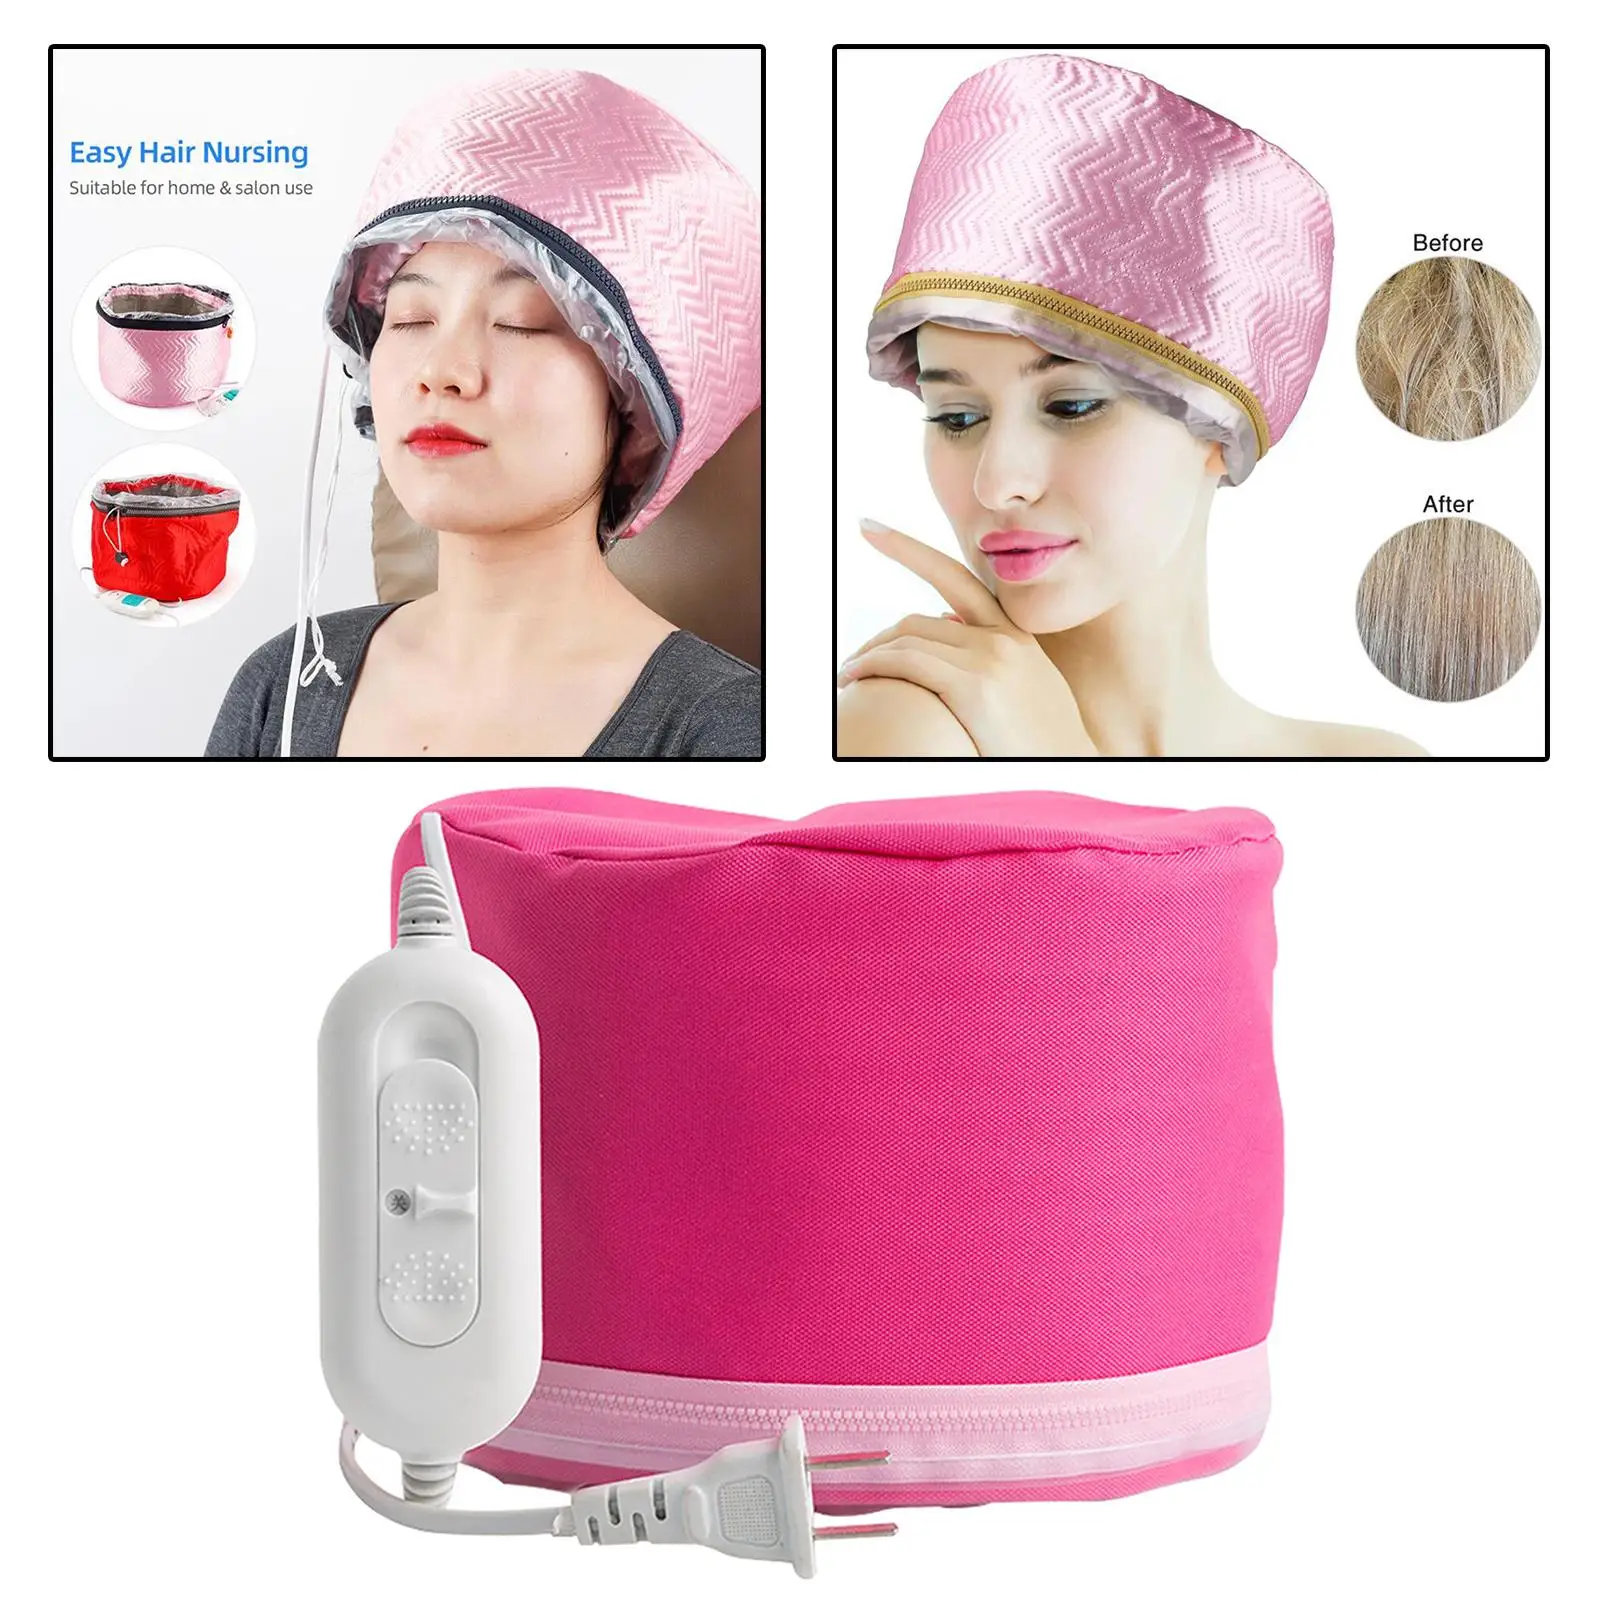 Hair Heating Caps Steamer 3-Mode Adjustable Size Beauty Tool Thermal Caps for Deep Conditioning Salon Hair Care Nourishing SPA